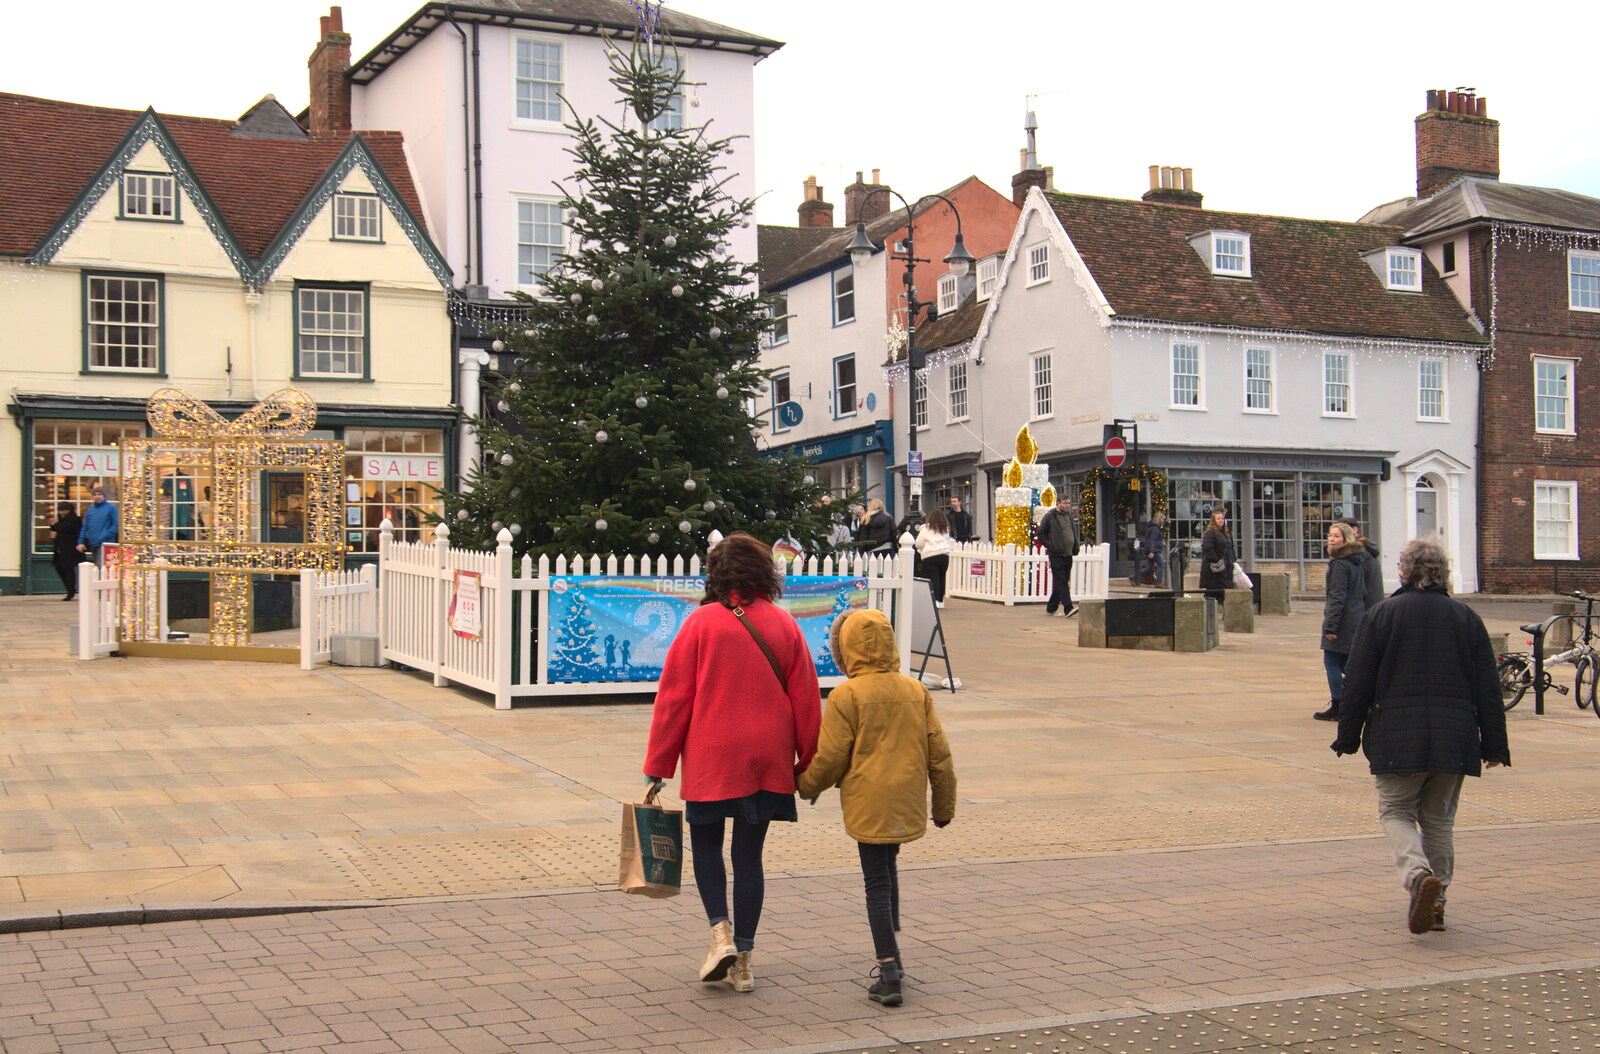 Harry and Isobel cross Angel Hill from A Few Hours in Bury St. Edmunds, Suffolk - 3rd January 2022